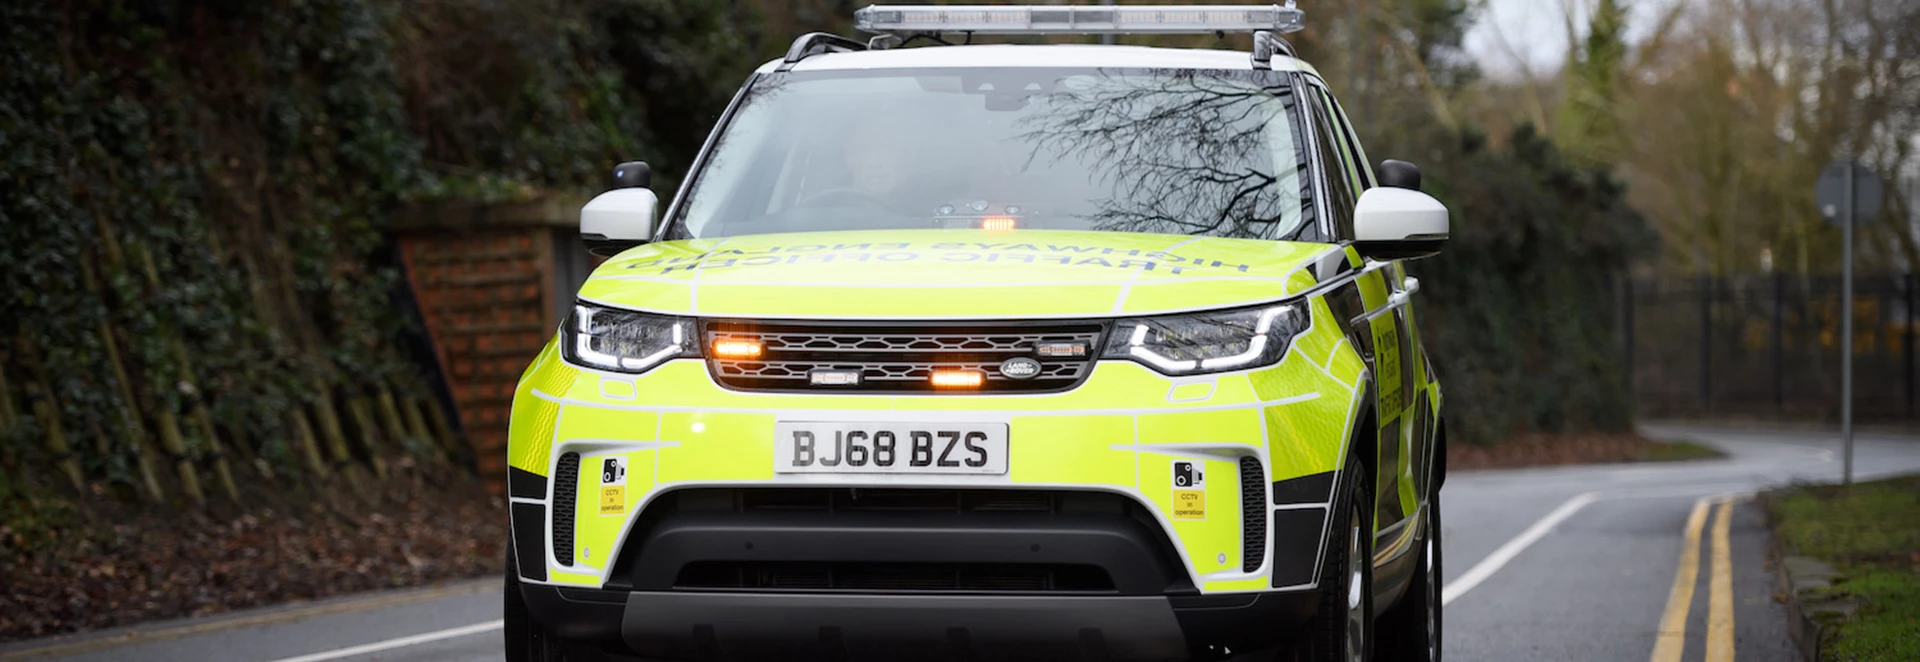 Land Rover delivers first of 70 Discovery patrol vehicles